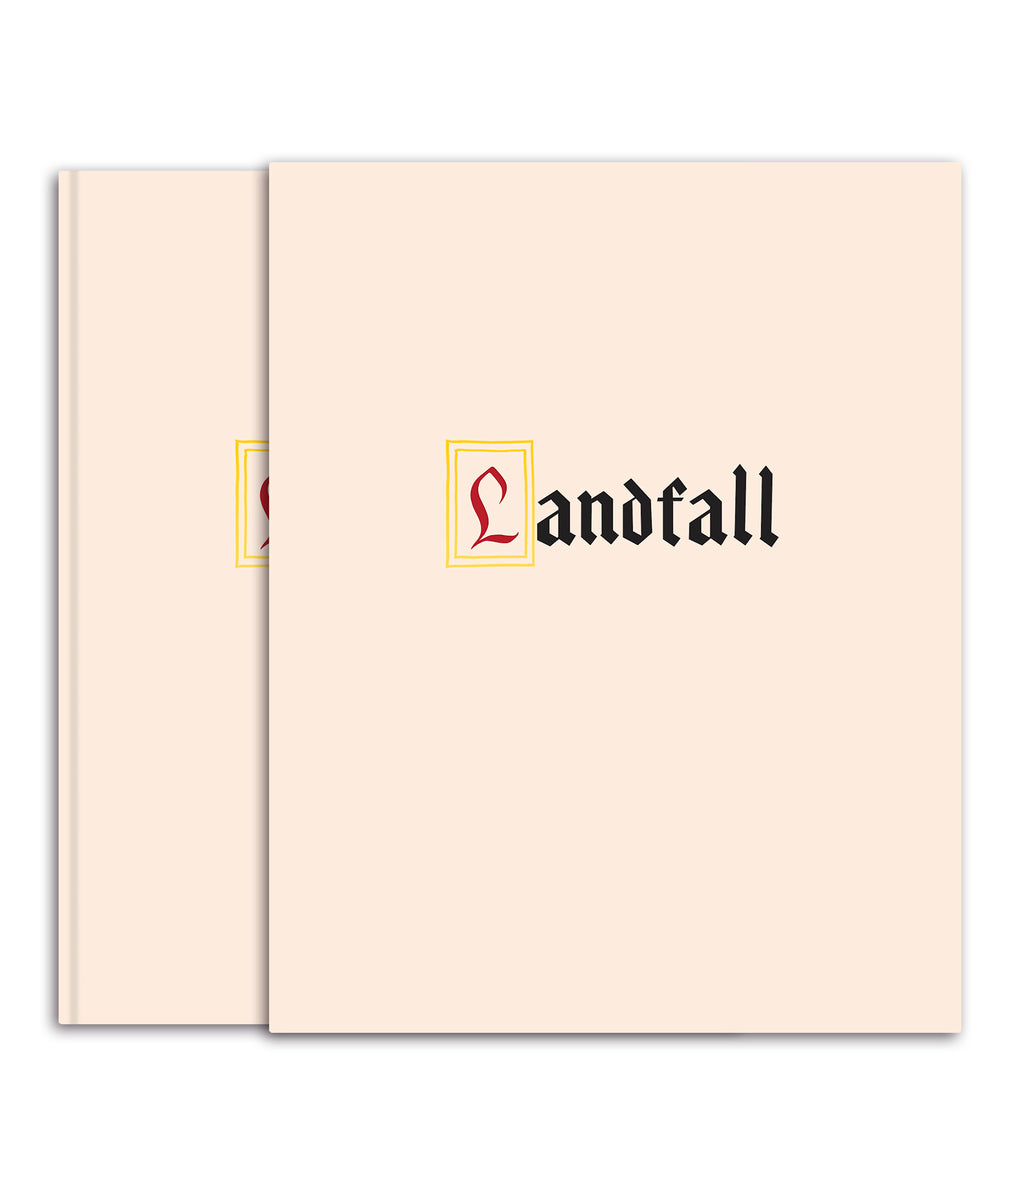 Landfall - Special Edition Slipcase with Print